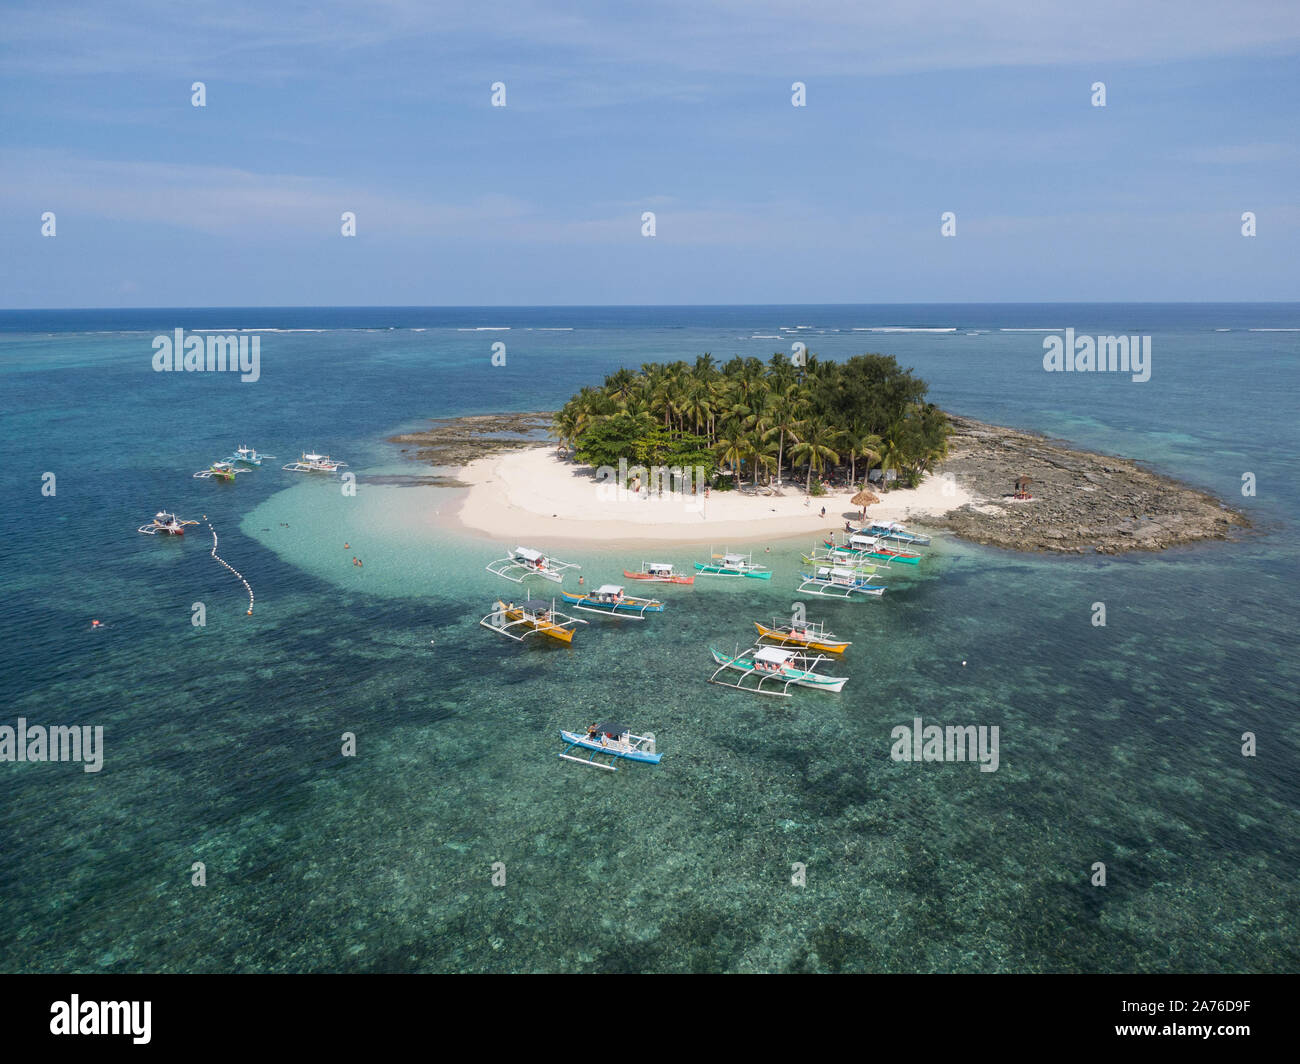 Famous tourism island in Siargao, Surigao del Norte, Philippines, South East Asia; Guyam Island, Palm tree covered sandy beach island in the ocean Stock Photo